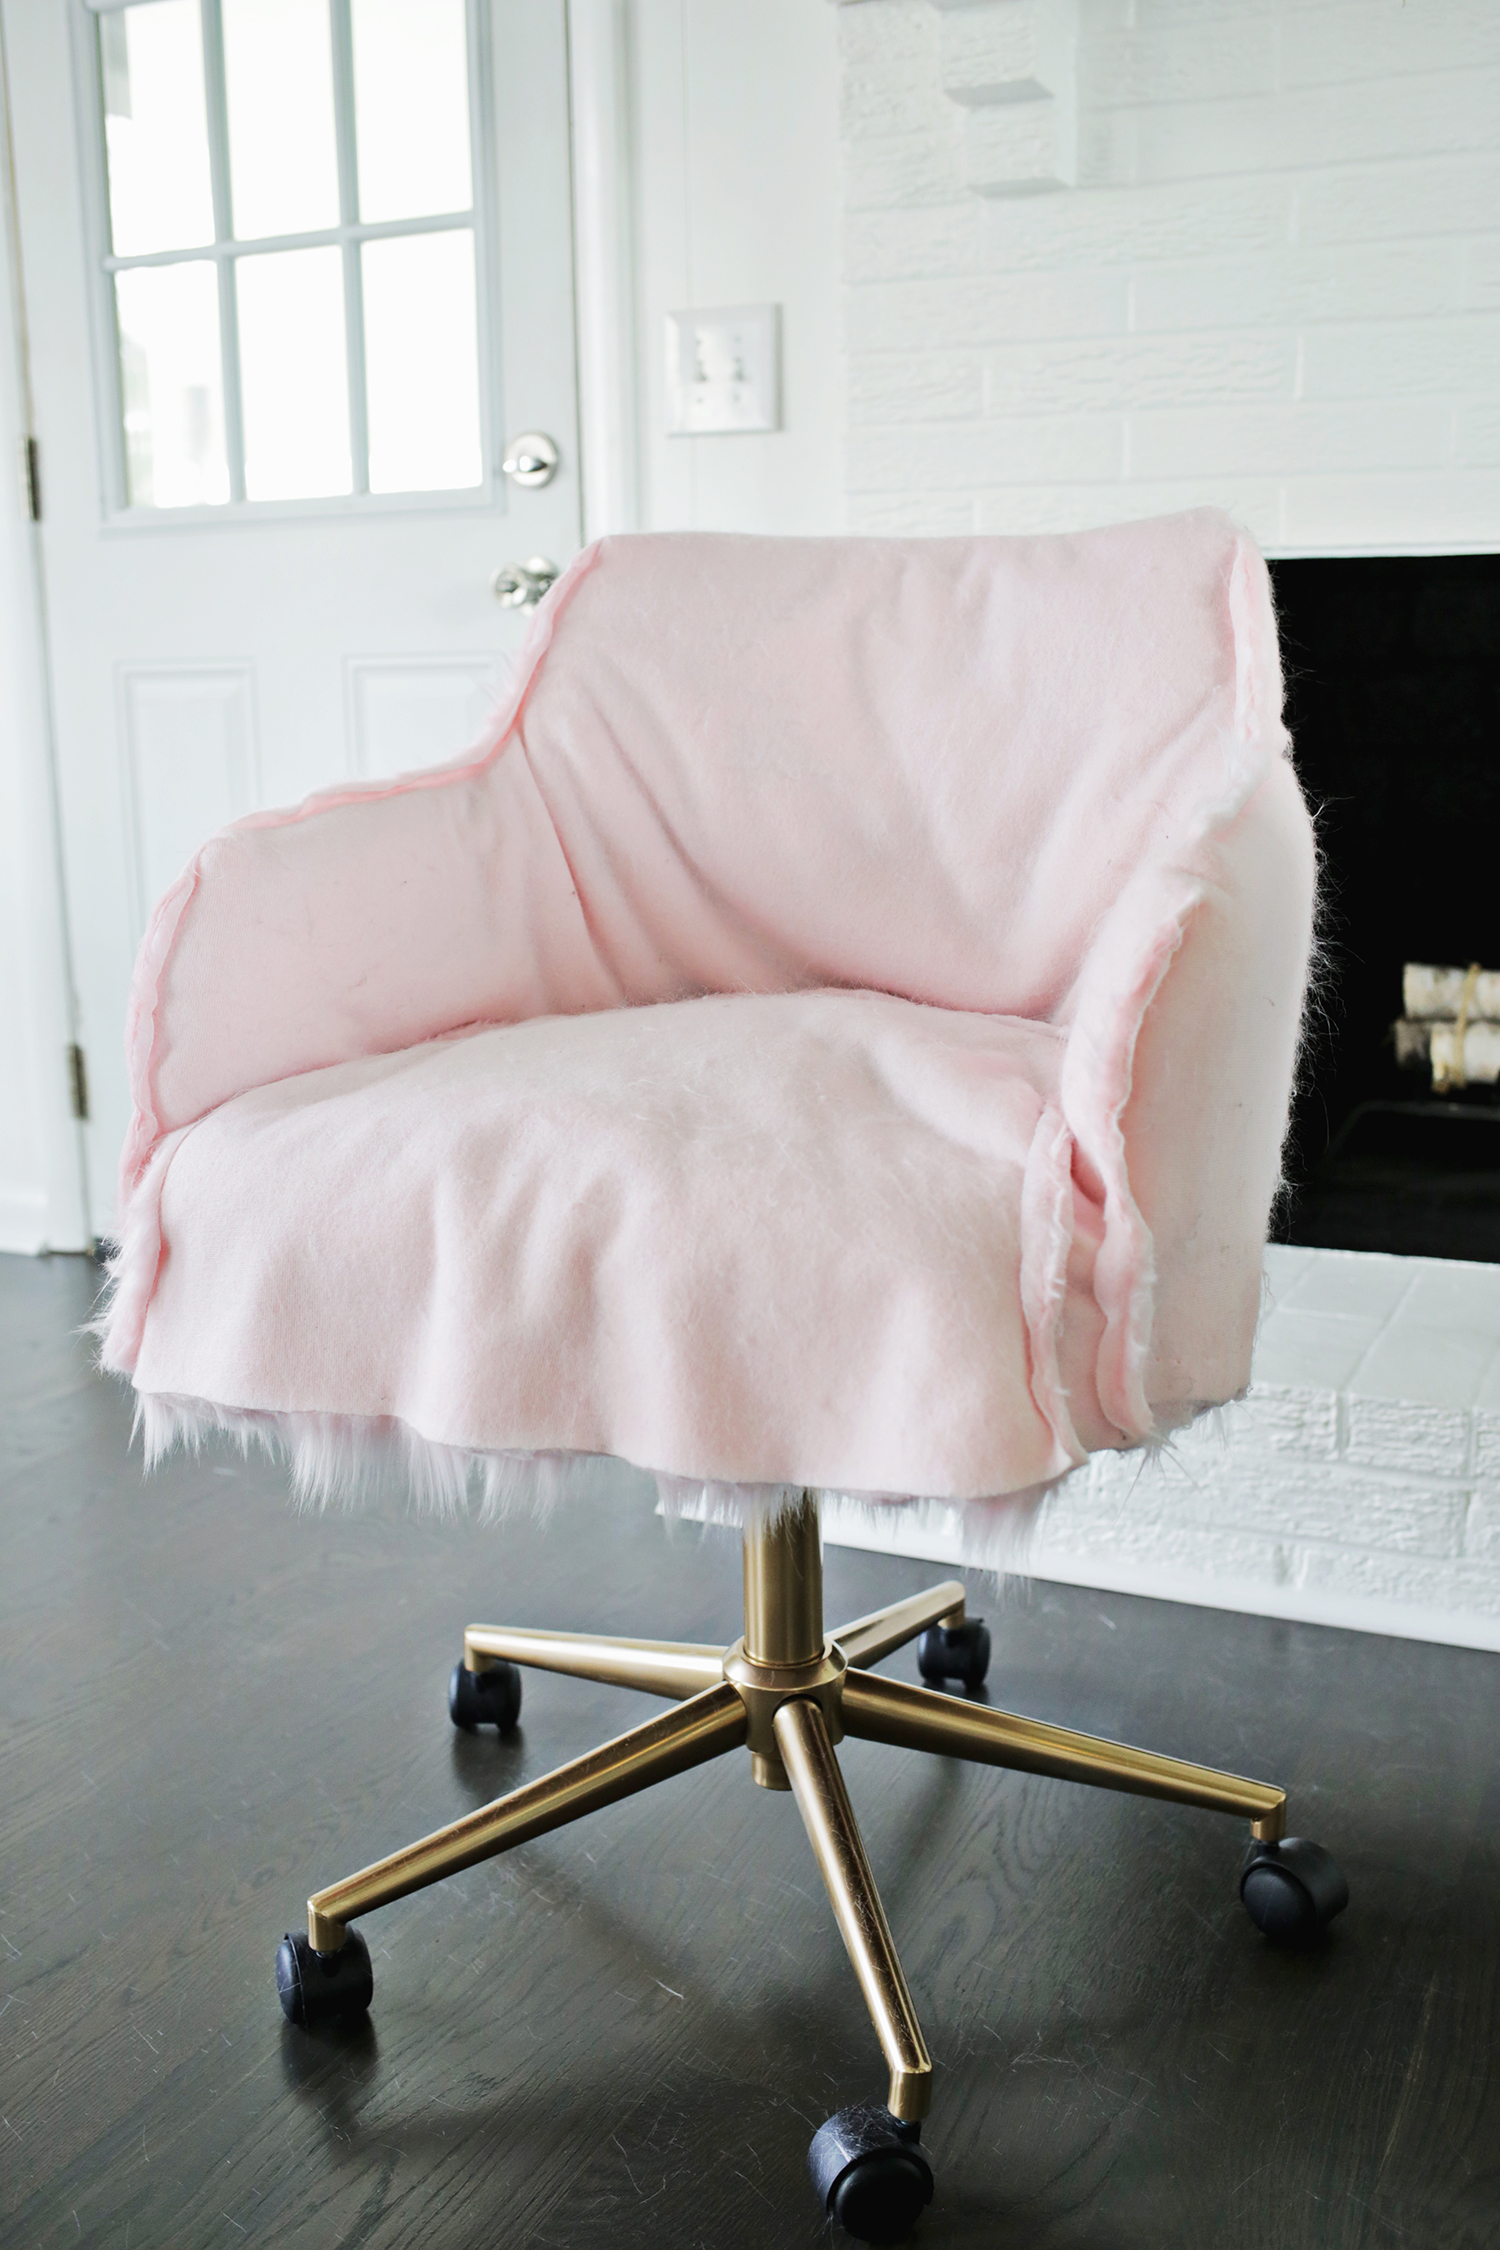 Glam diy office chair makeover with faux fur  6